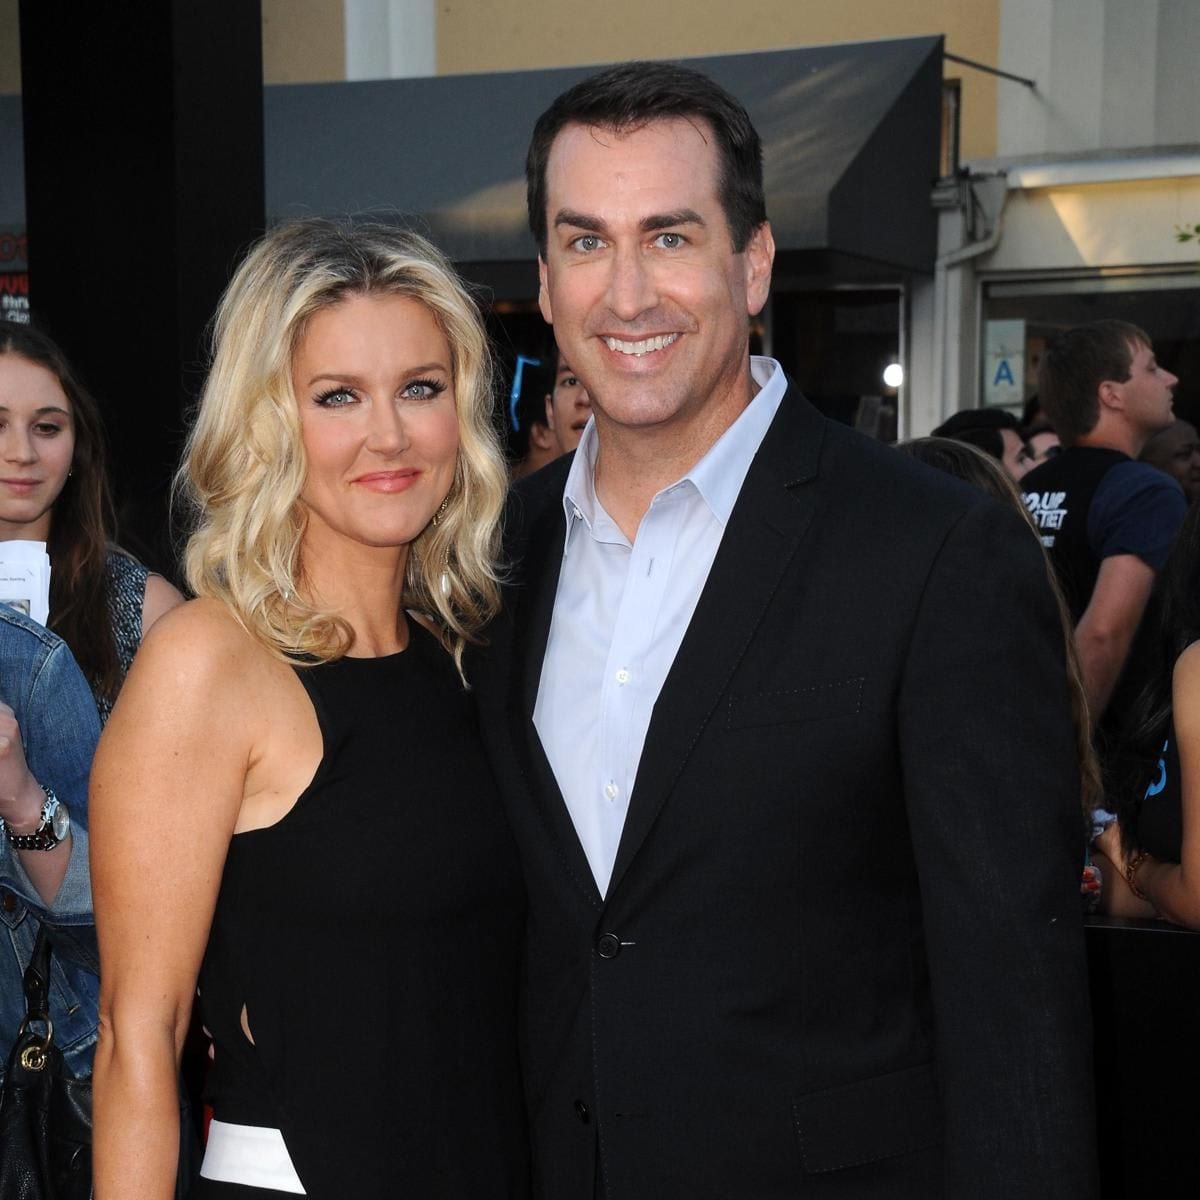 Rob Riggle and ex-wife Tiffany Riggle at the premiere of Columbia Pictures' "22 Jump Street"